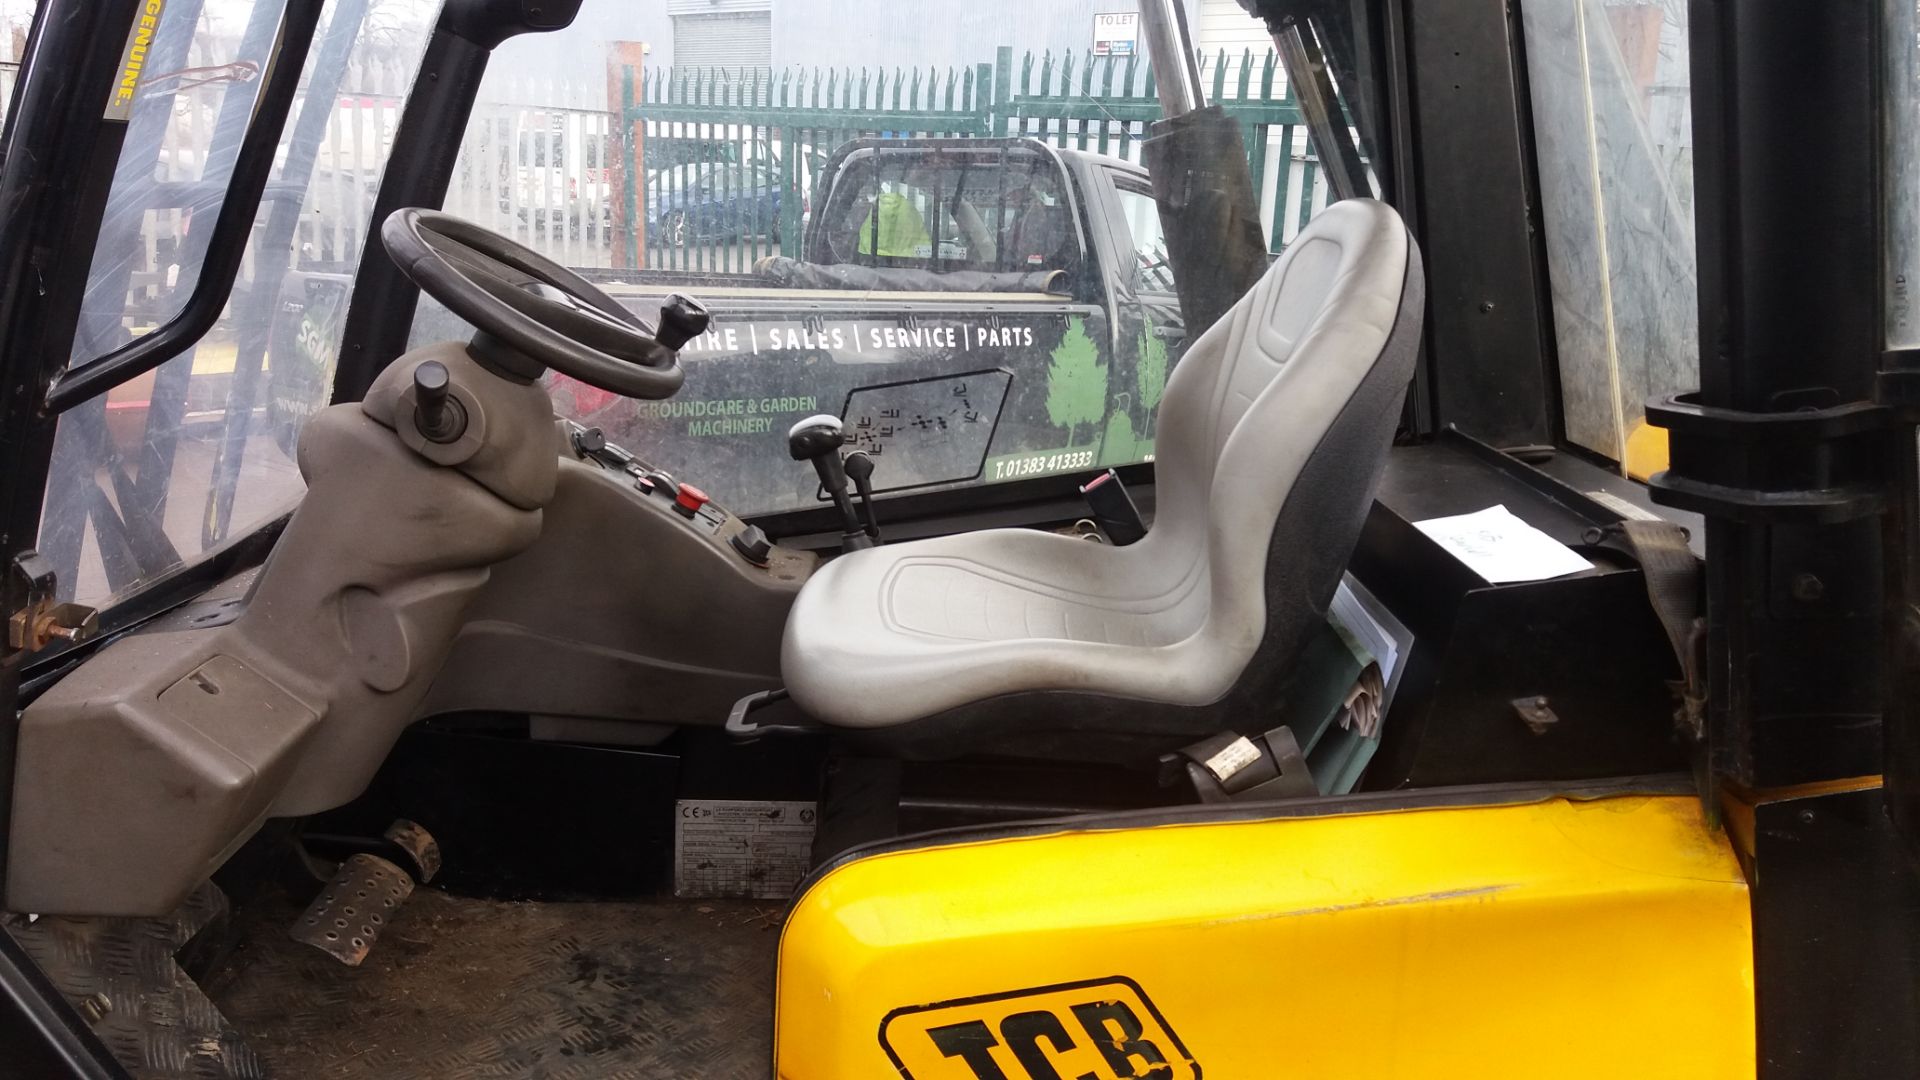 JCB TLT30 Teletruk counterbalance forklift with telescopic boom - Image 19 of 22